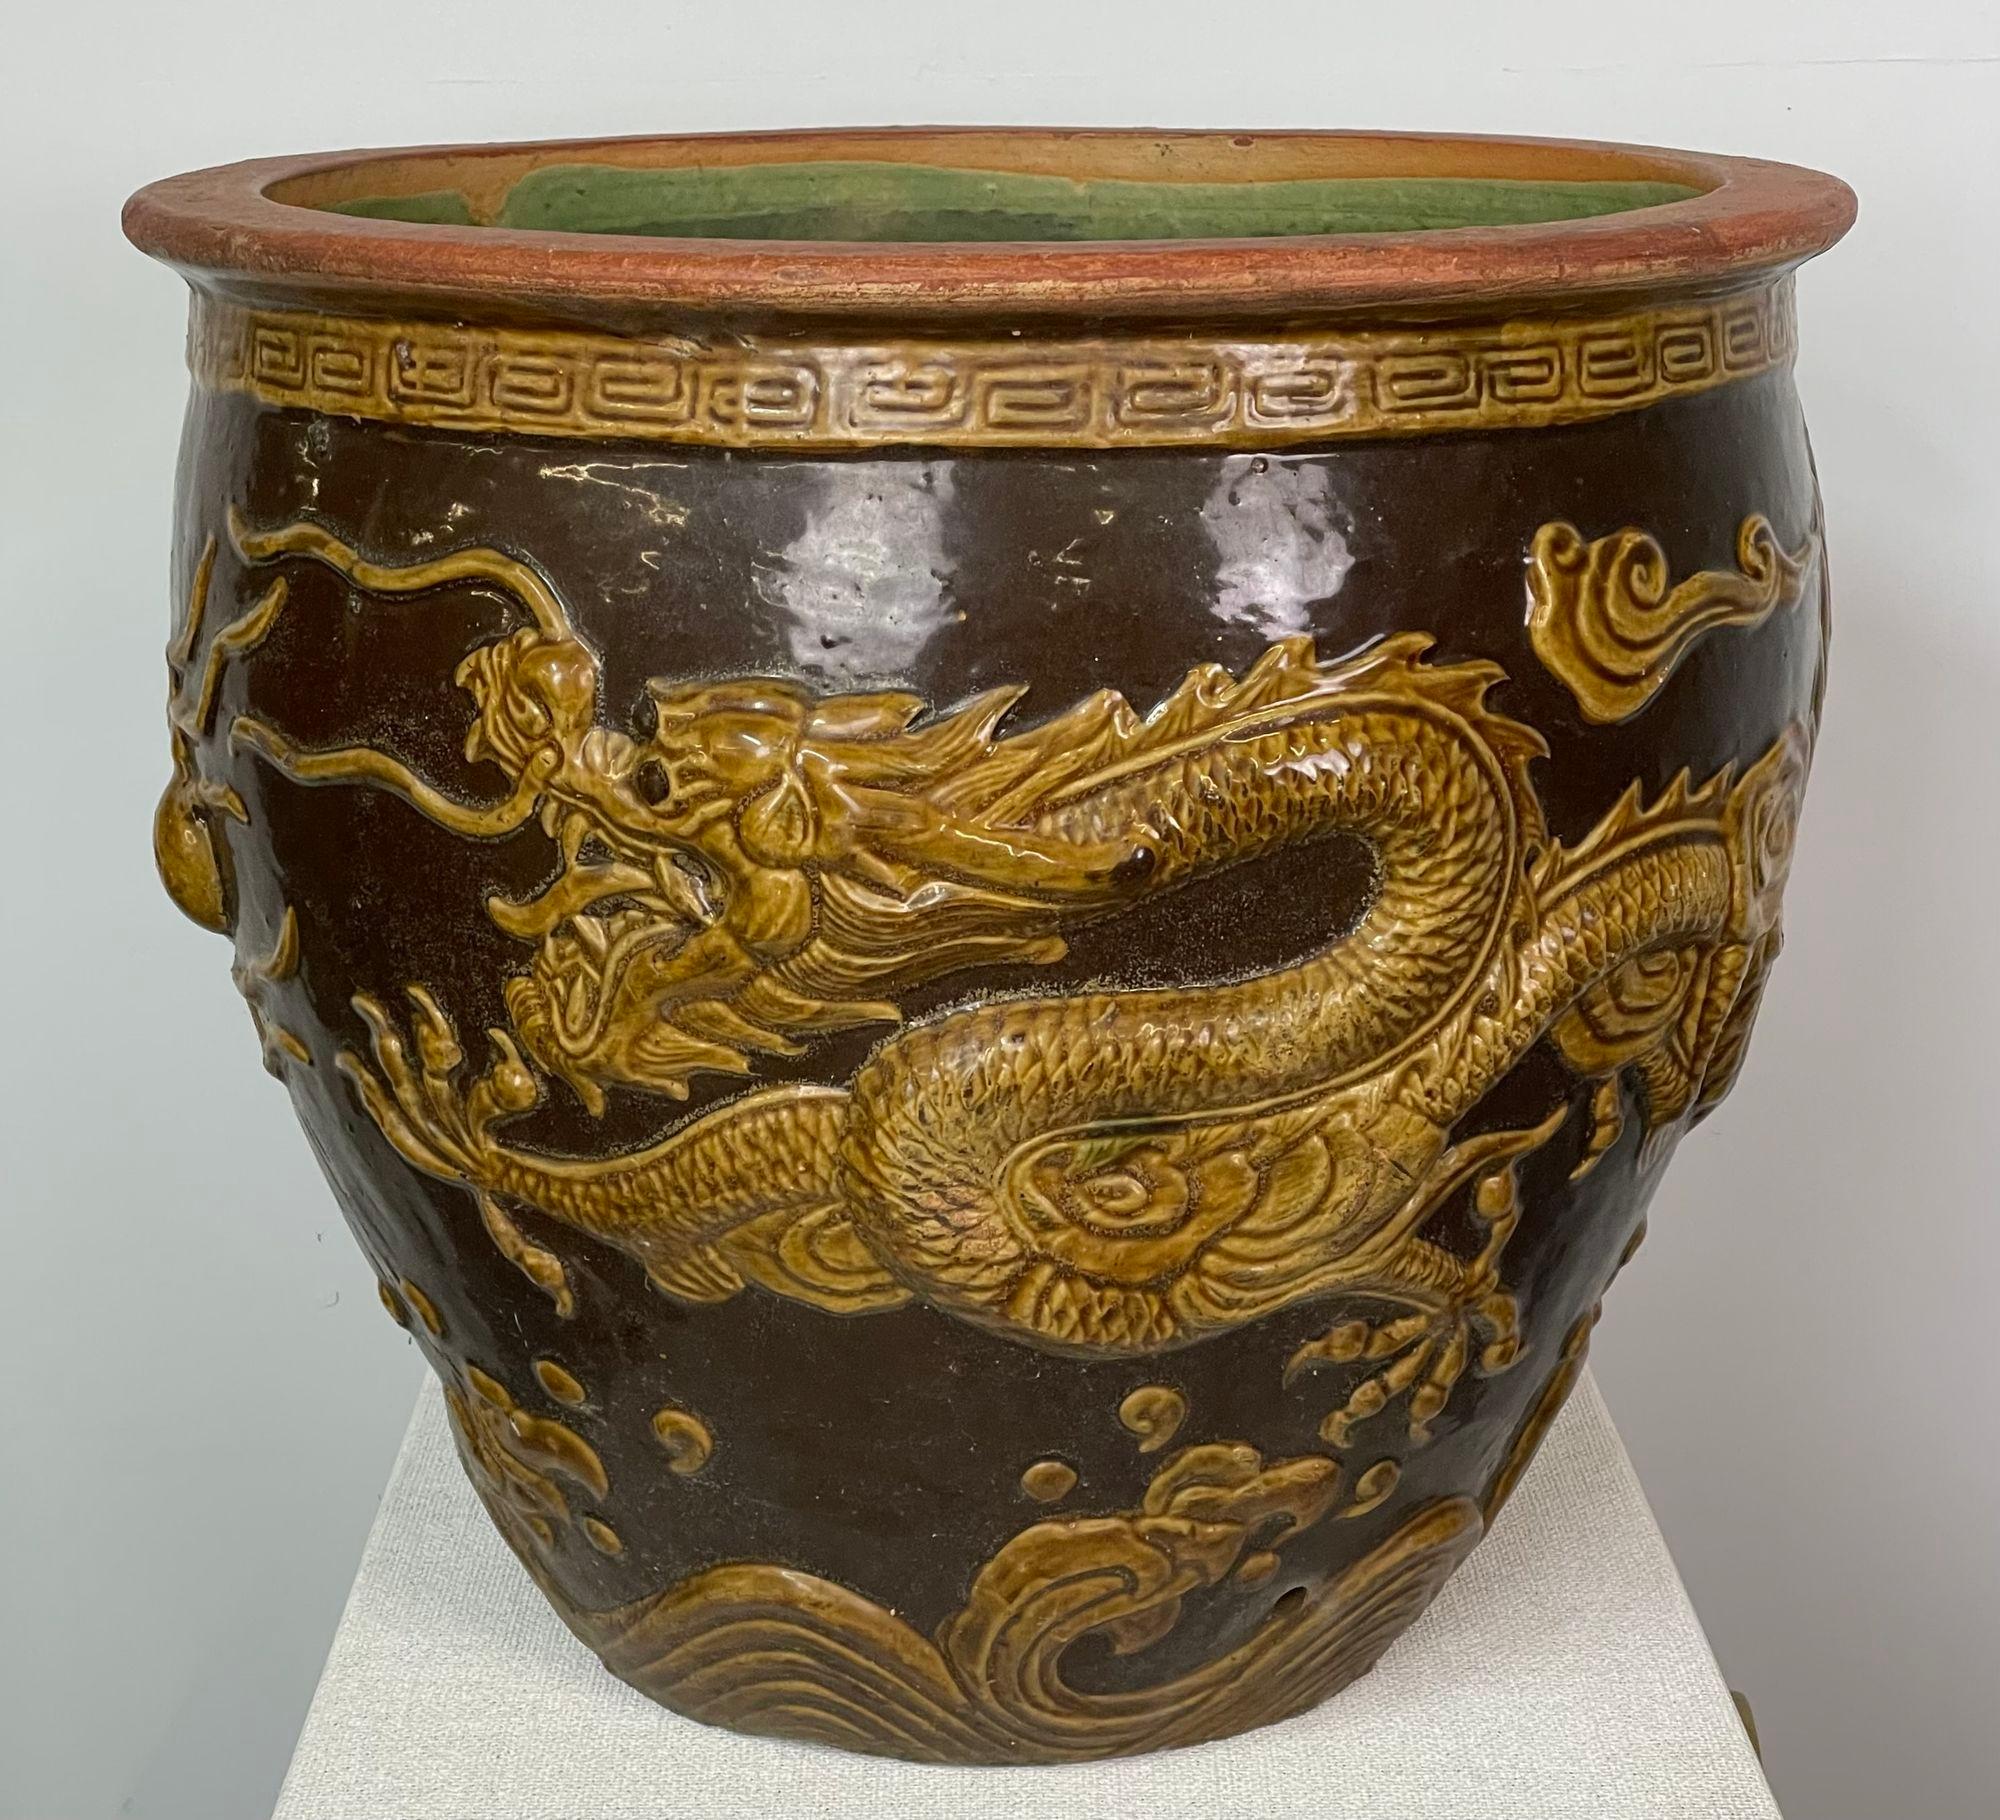 Dragon cachepot planter jardiniere fish bowl in Tony Duquette style
Asian jardiniere features raised detailed dragons in different shades of glazed earth tones and turquoise glaze on the inside. It has good balance and a pleasing silhouette; it has